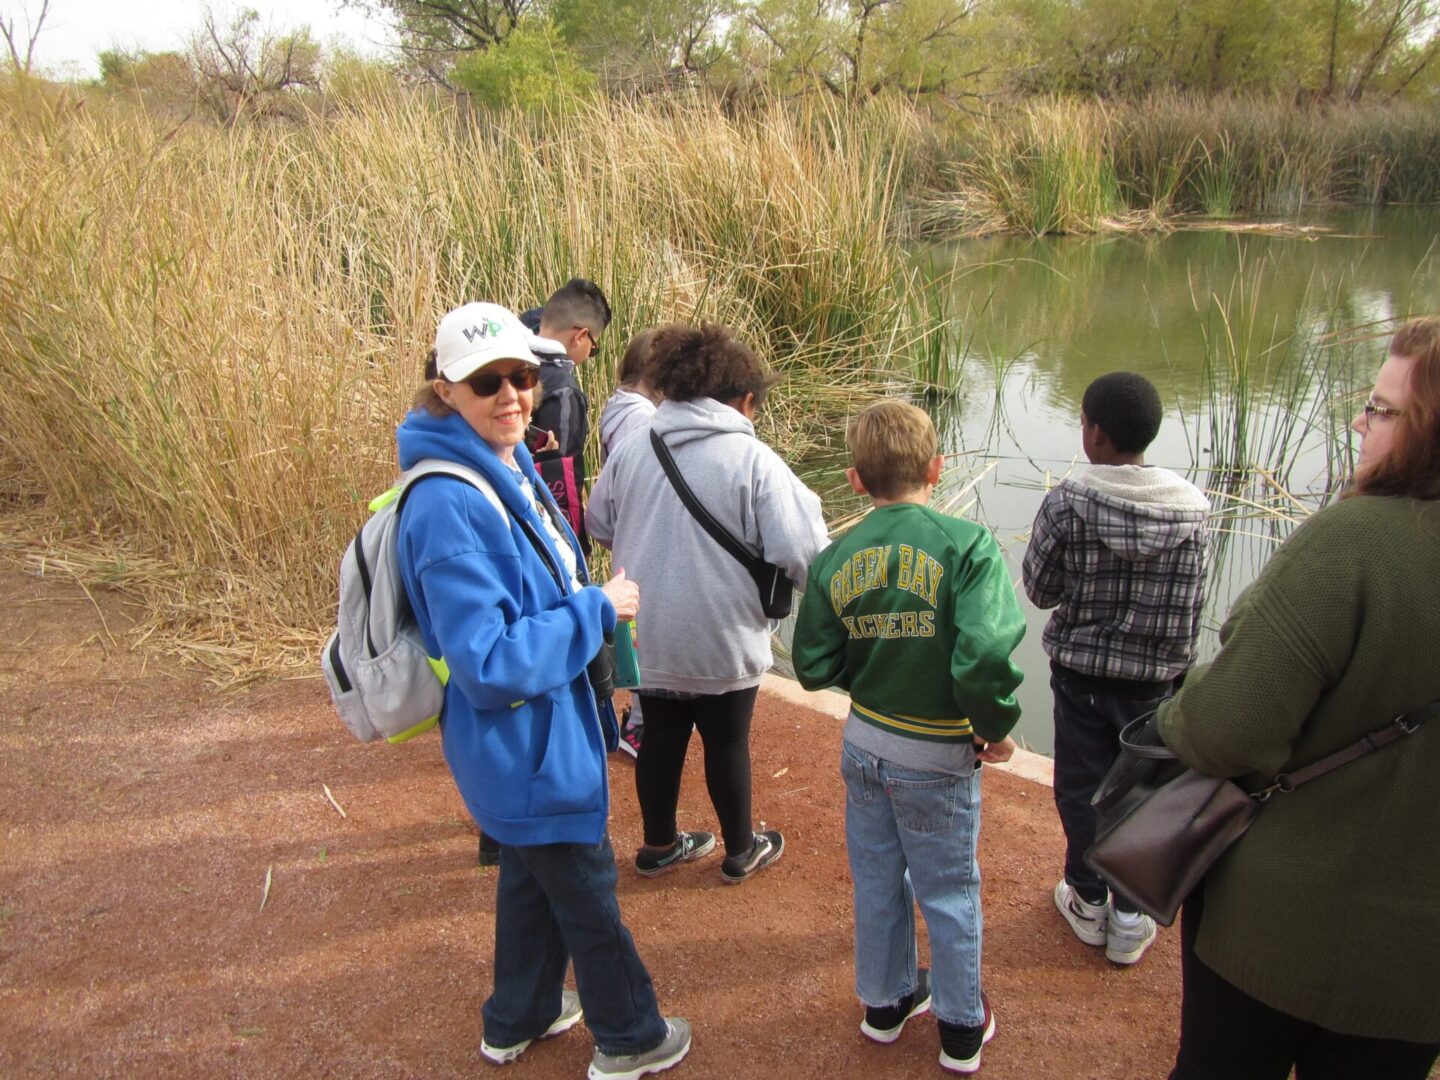 A group of people standing near a pond with reeds.